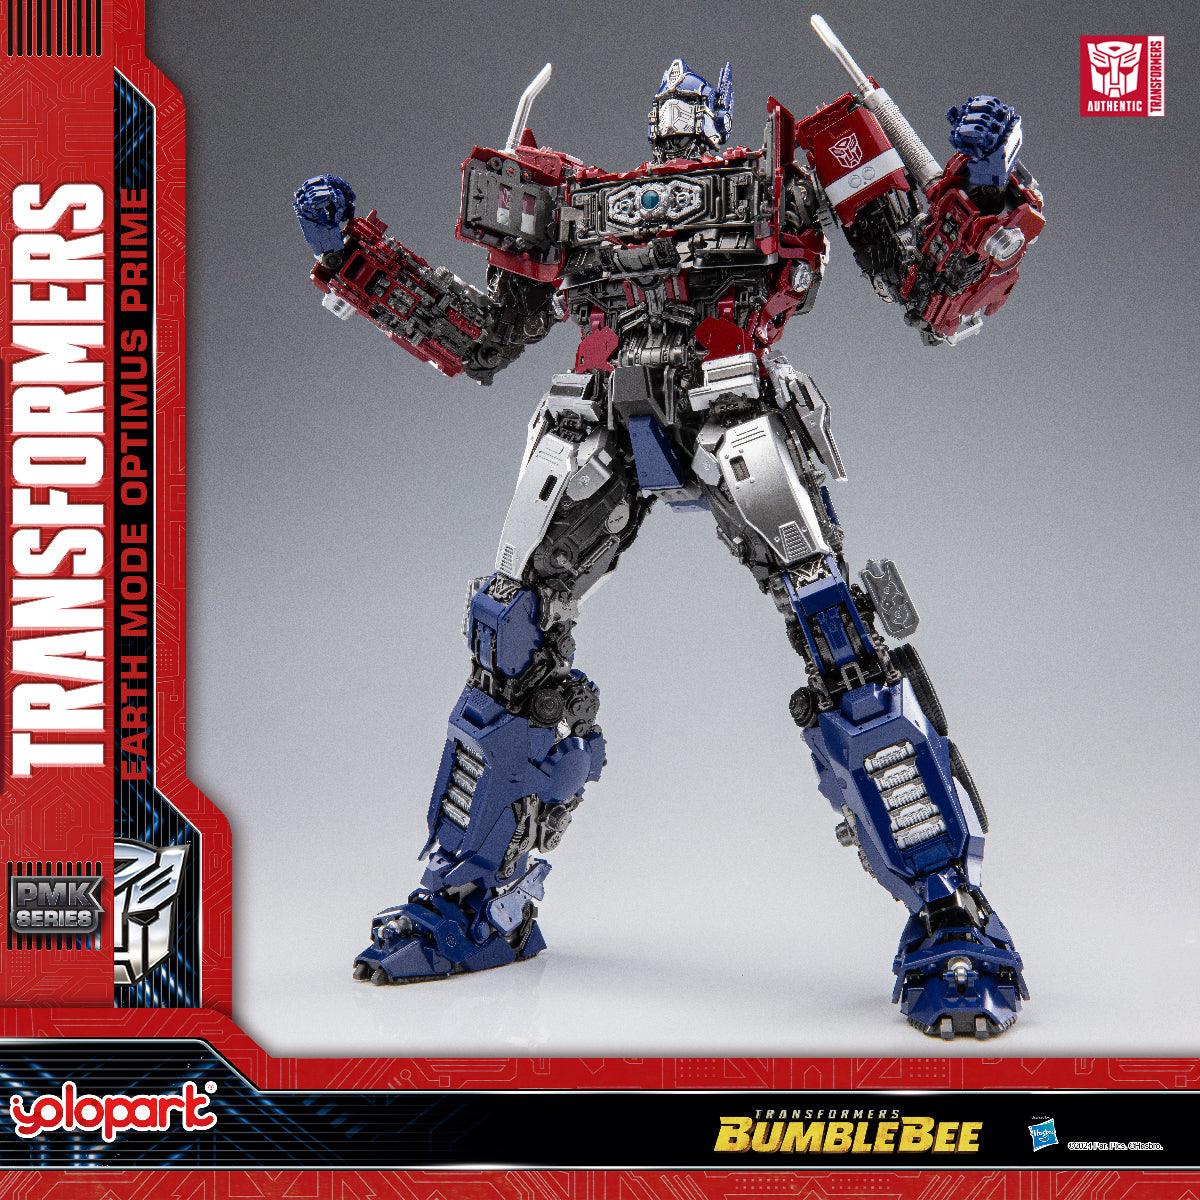 Yolopark Revealed Another Officially Licensed Transformers Model